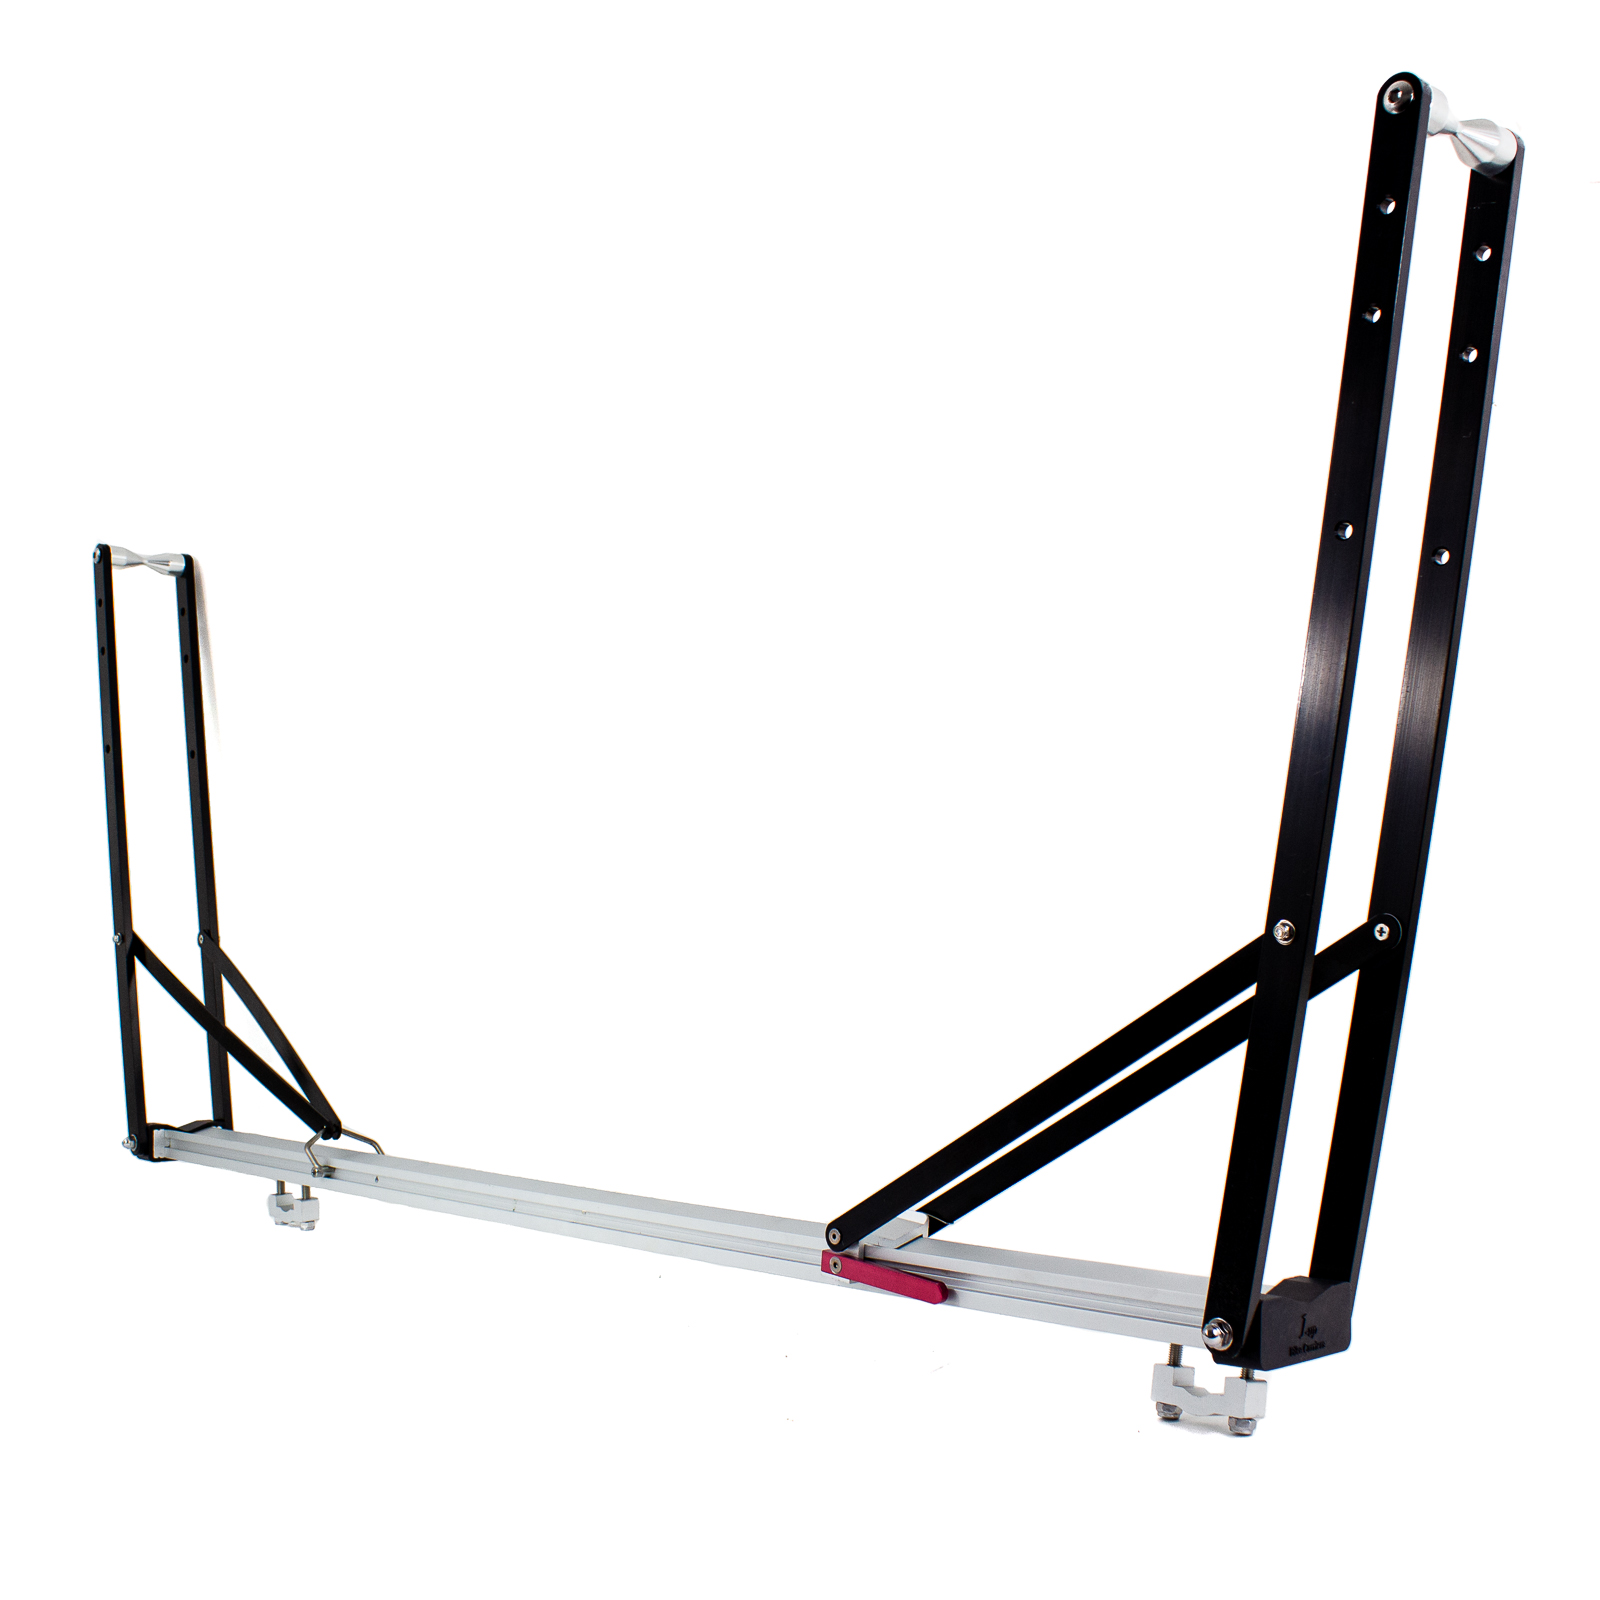 1Up Roof Bike Rack for Round/Squarebars Questions & Answers